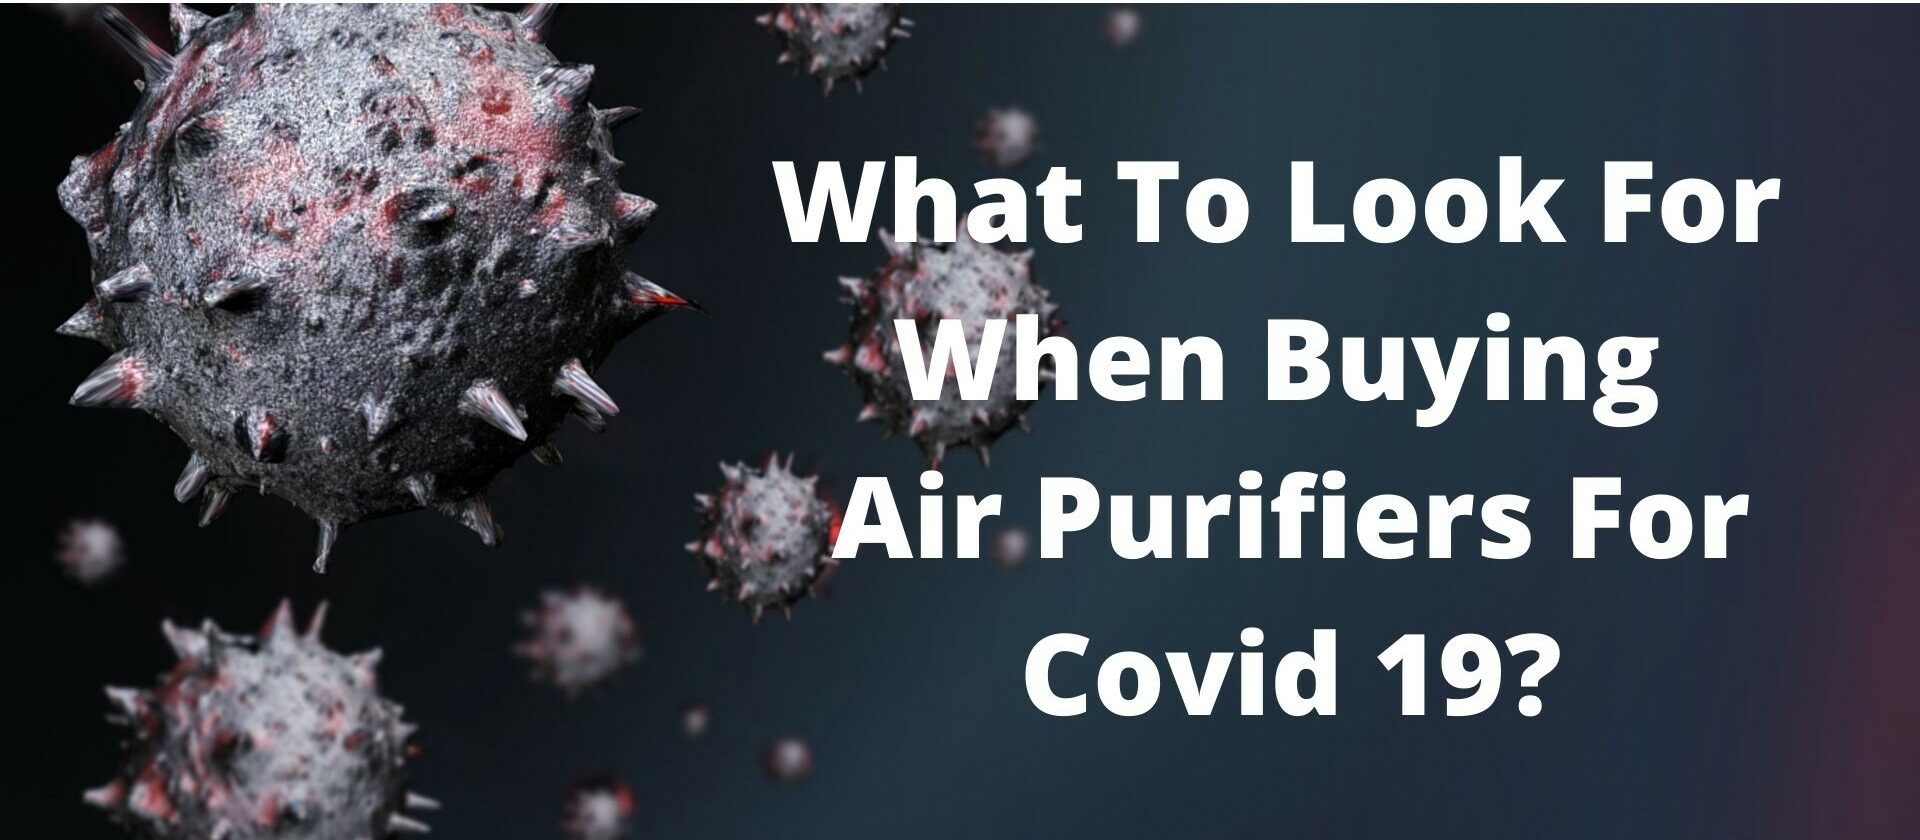 Air Purifiers For Covid 19